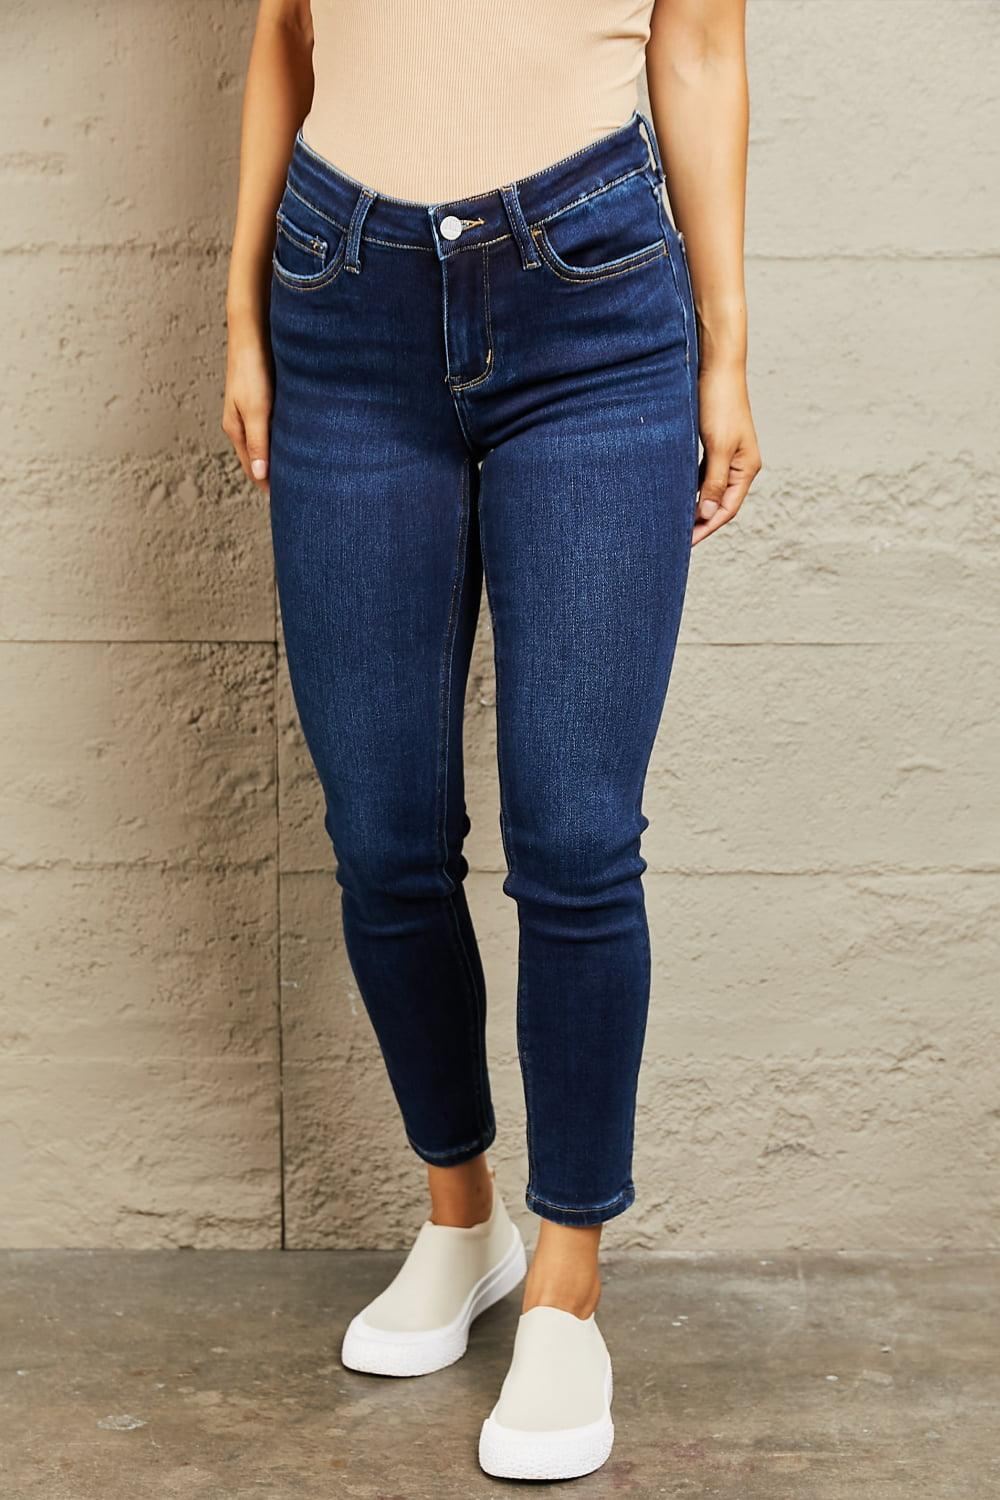 Mid Rise Dark Wash Jeans - Slim Fit - Inspired Eye Boutique